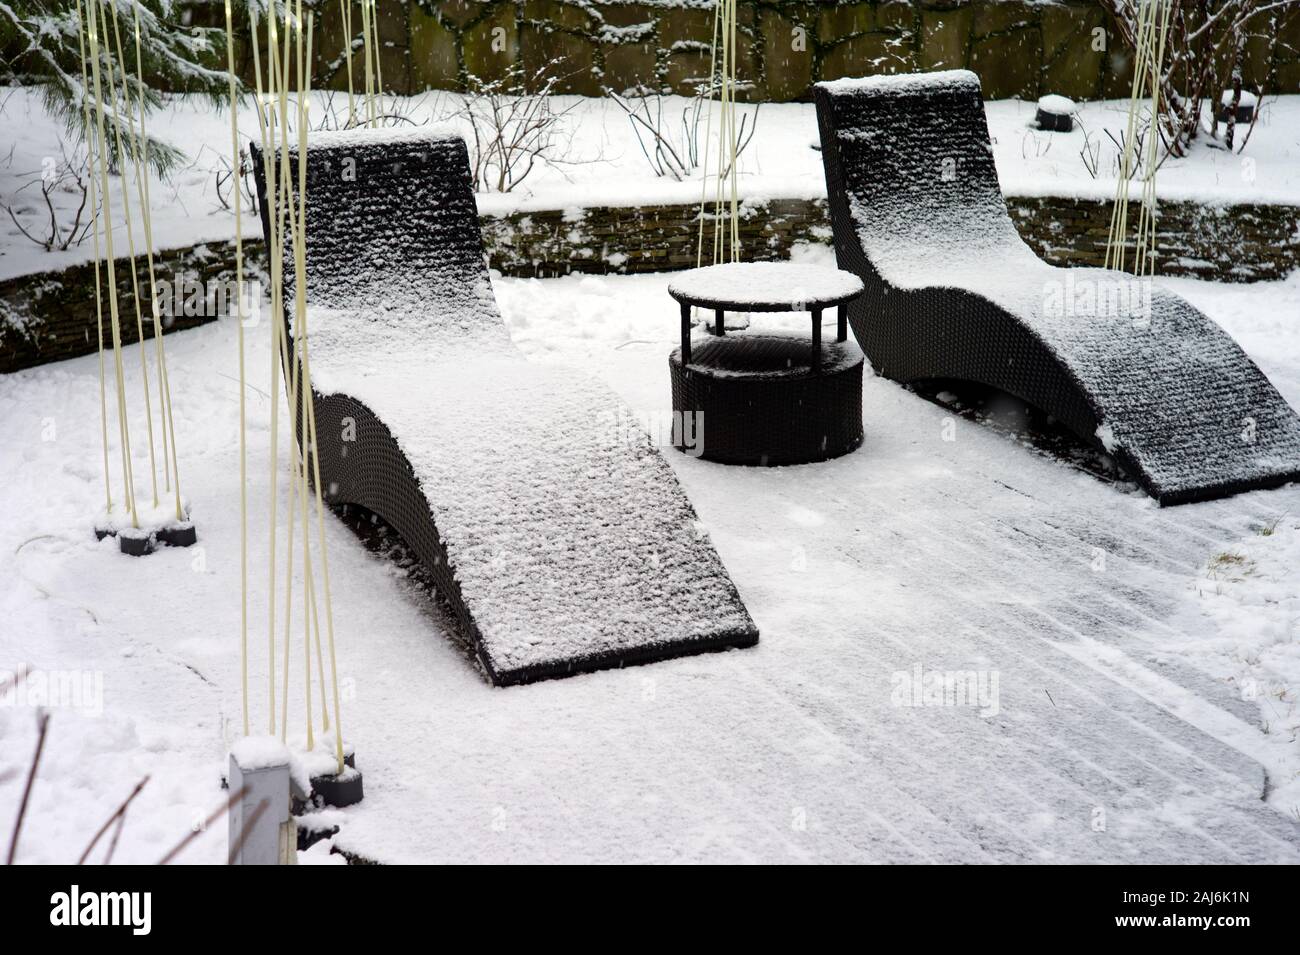 Two garden armchairs abandoned in a wibter garden under falling snow Stock Photo